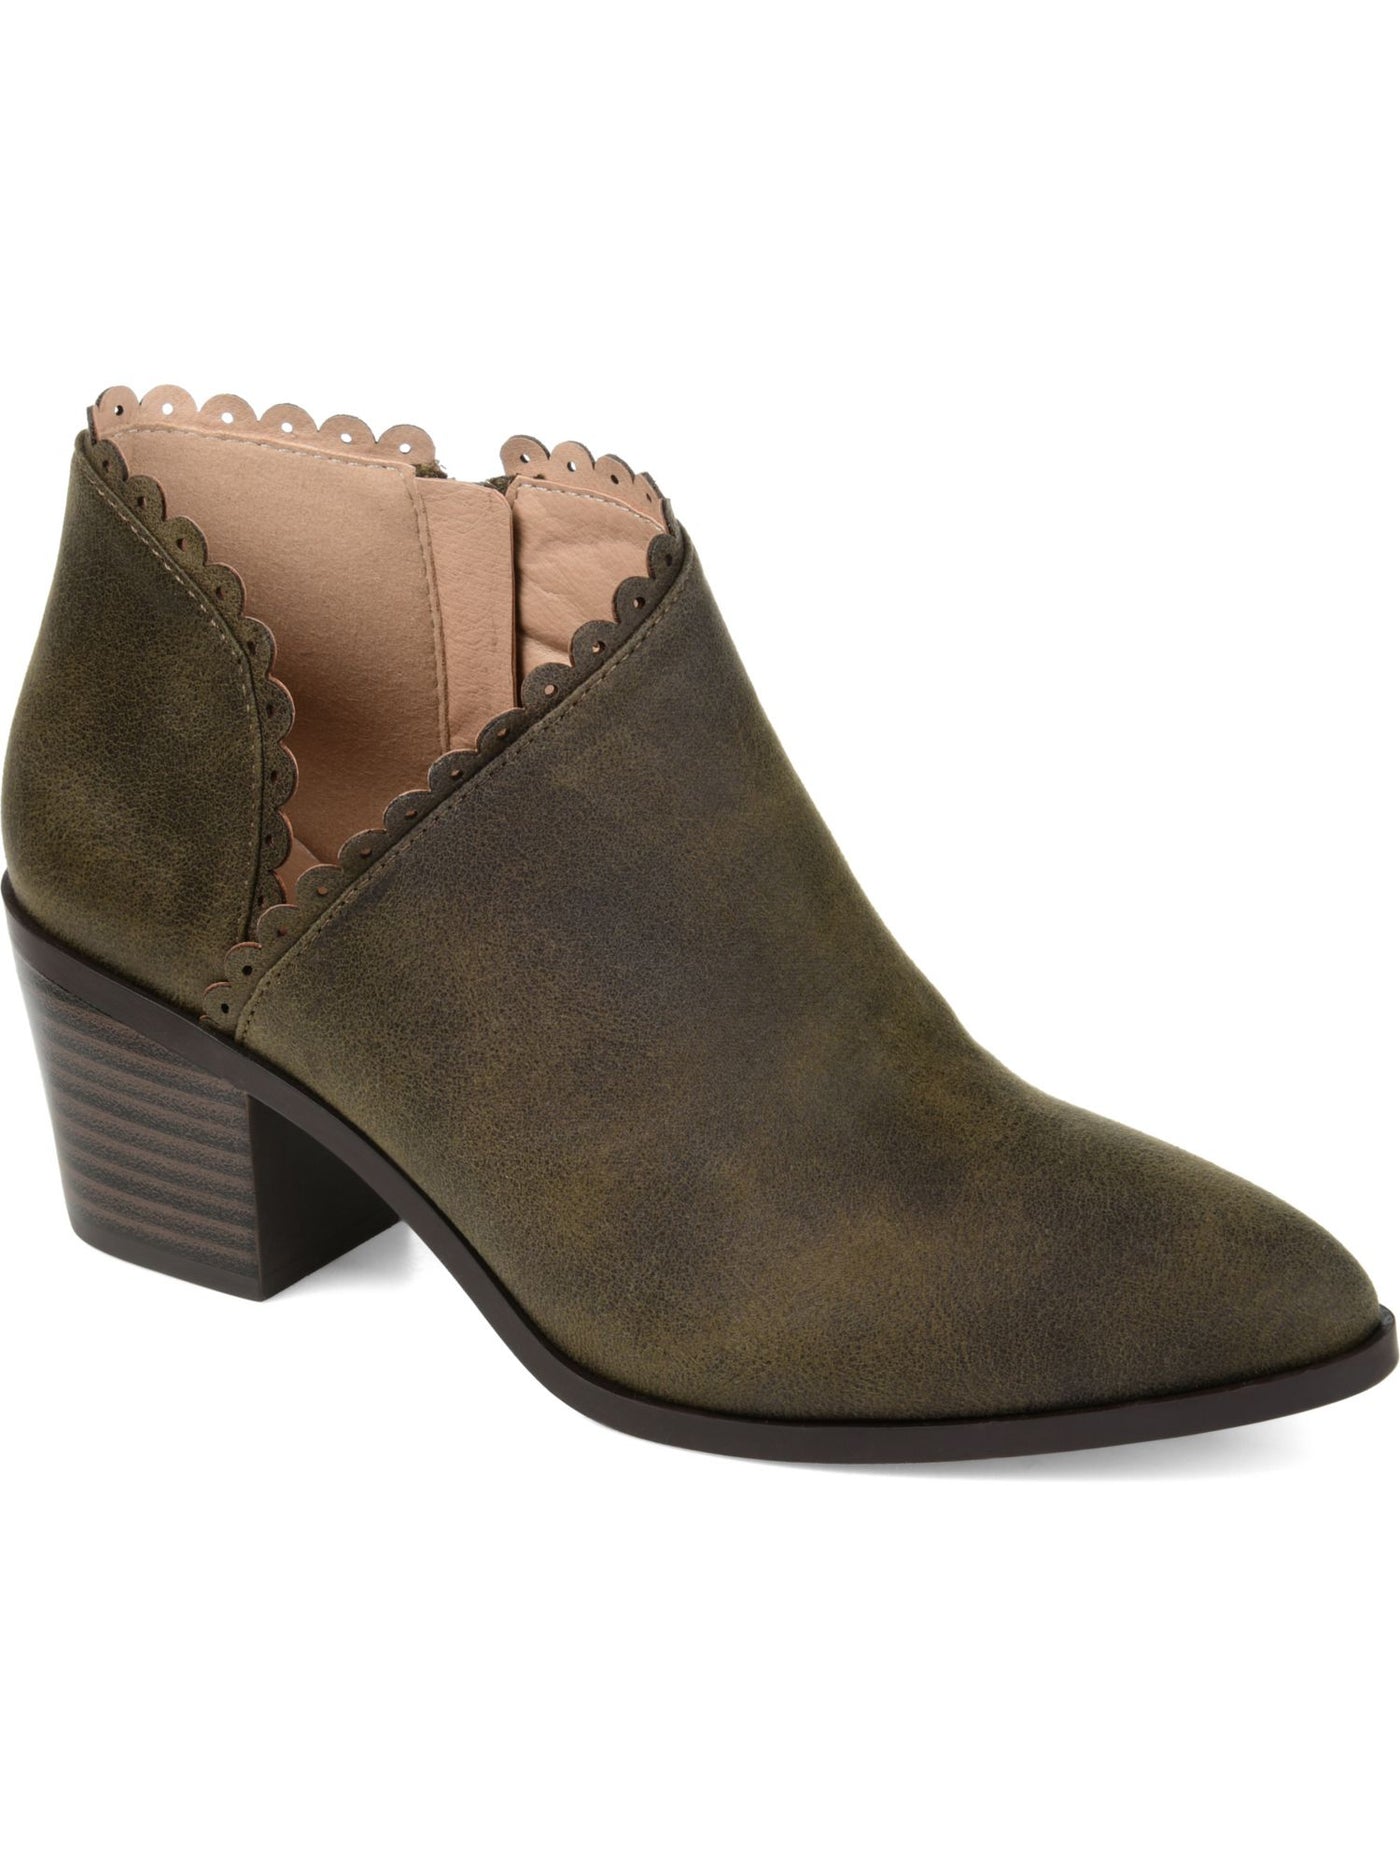 JOURNEE COLLECTION Womens Olive Green Asymmetrical Scalloped Tessa Almond Toe Zip-Up Booties 8.5 M